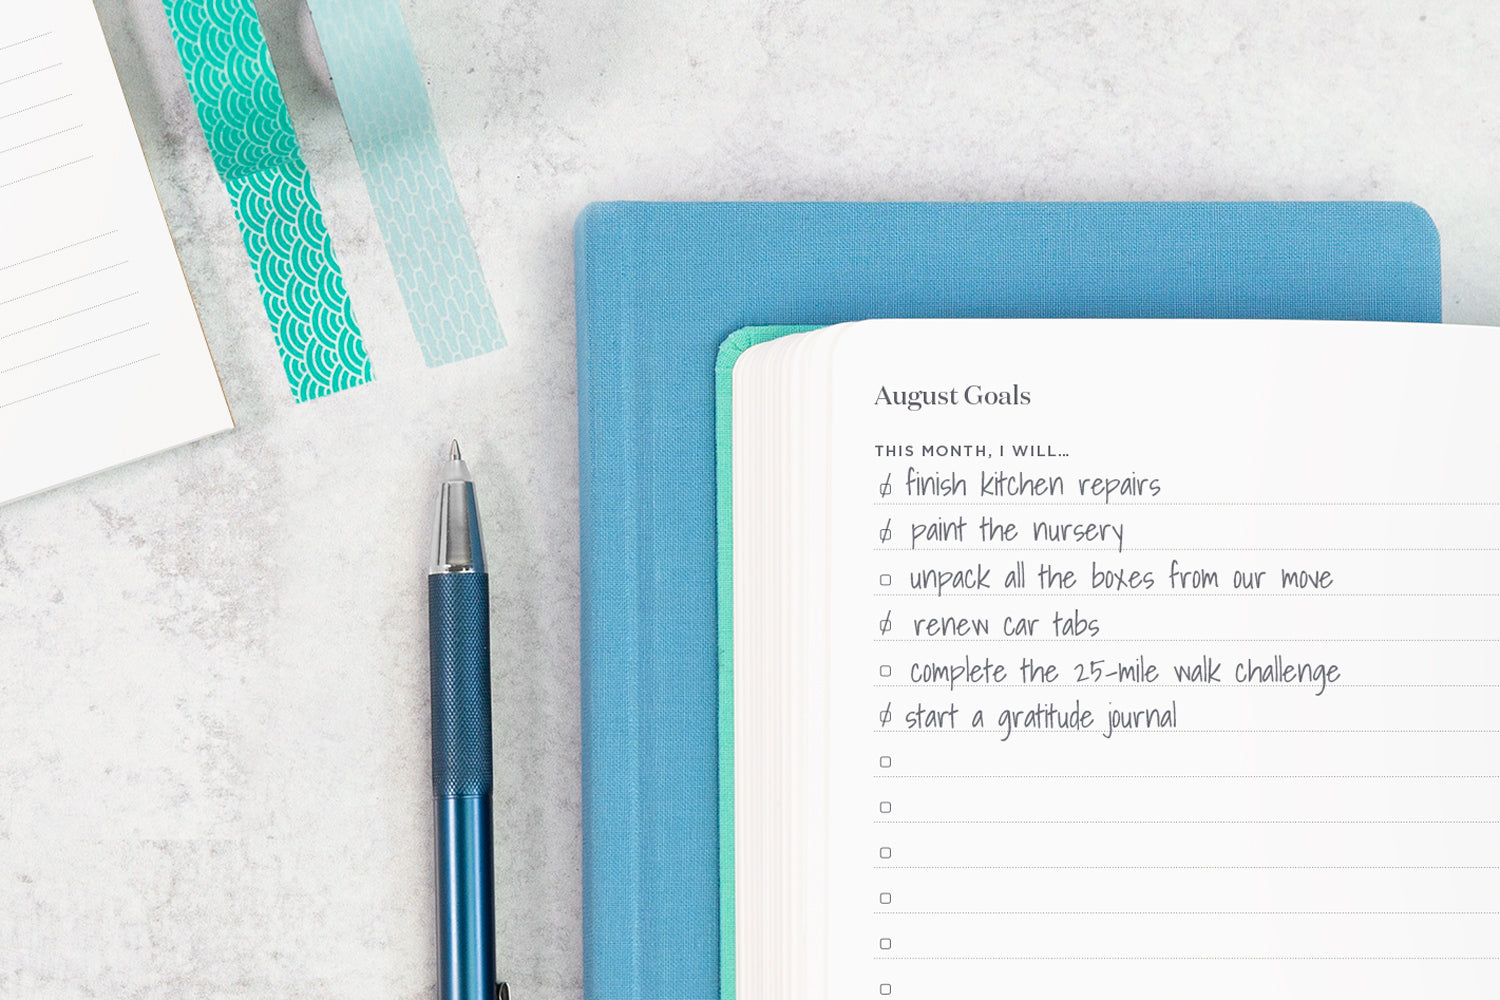 A blue planner on a white table next to a blue pen and teal washi tape. In the open planner is a list of goals.